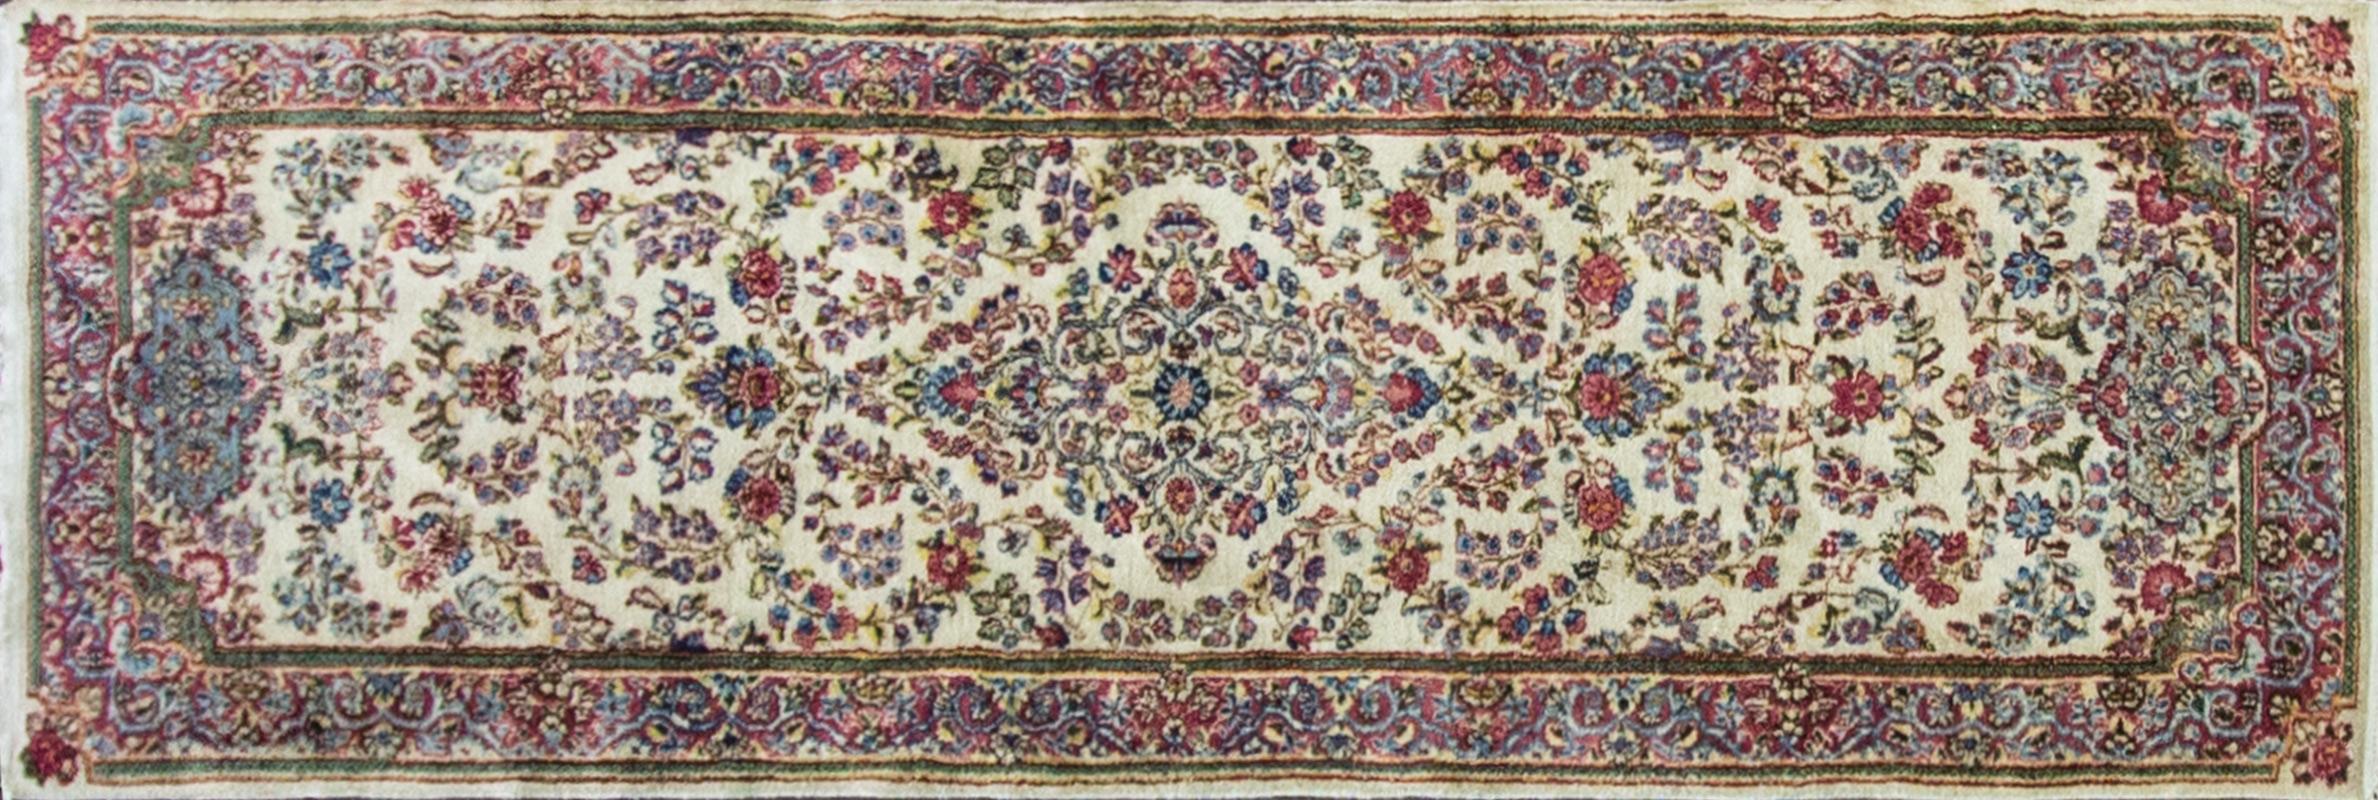 Gorgeous antique Persian Kerman Runner, circa 1930 in excellent condition.
Kirman was a very important antique rug weaving centre dating from the Golden Age of Persian culture under the Safavid dynasty in the 16th century, on a par with Tabriz and